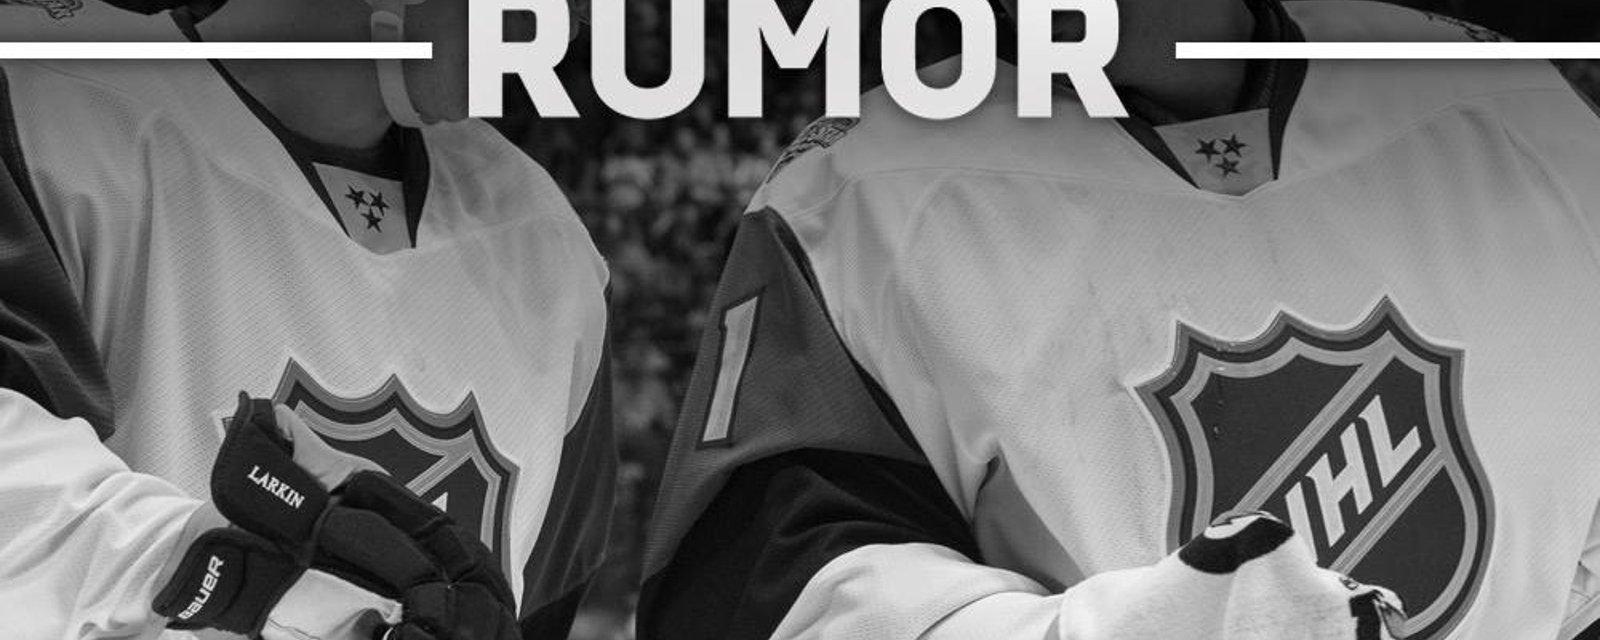 Two more players rumored to be leaving the NHL for the KHL.